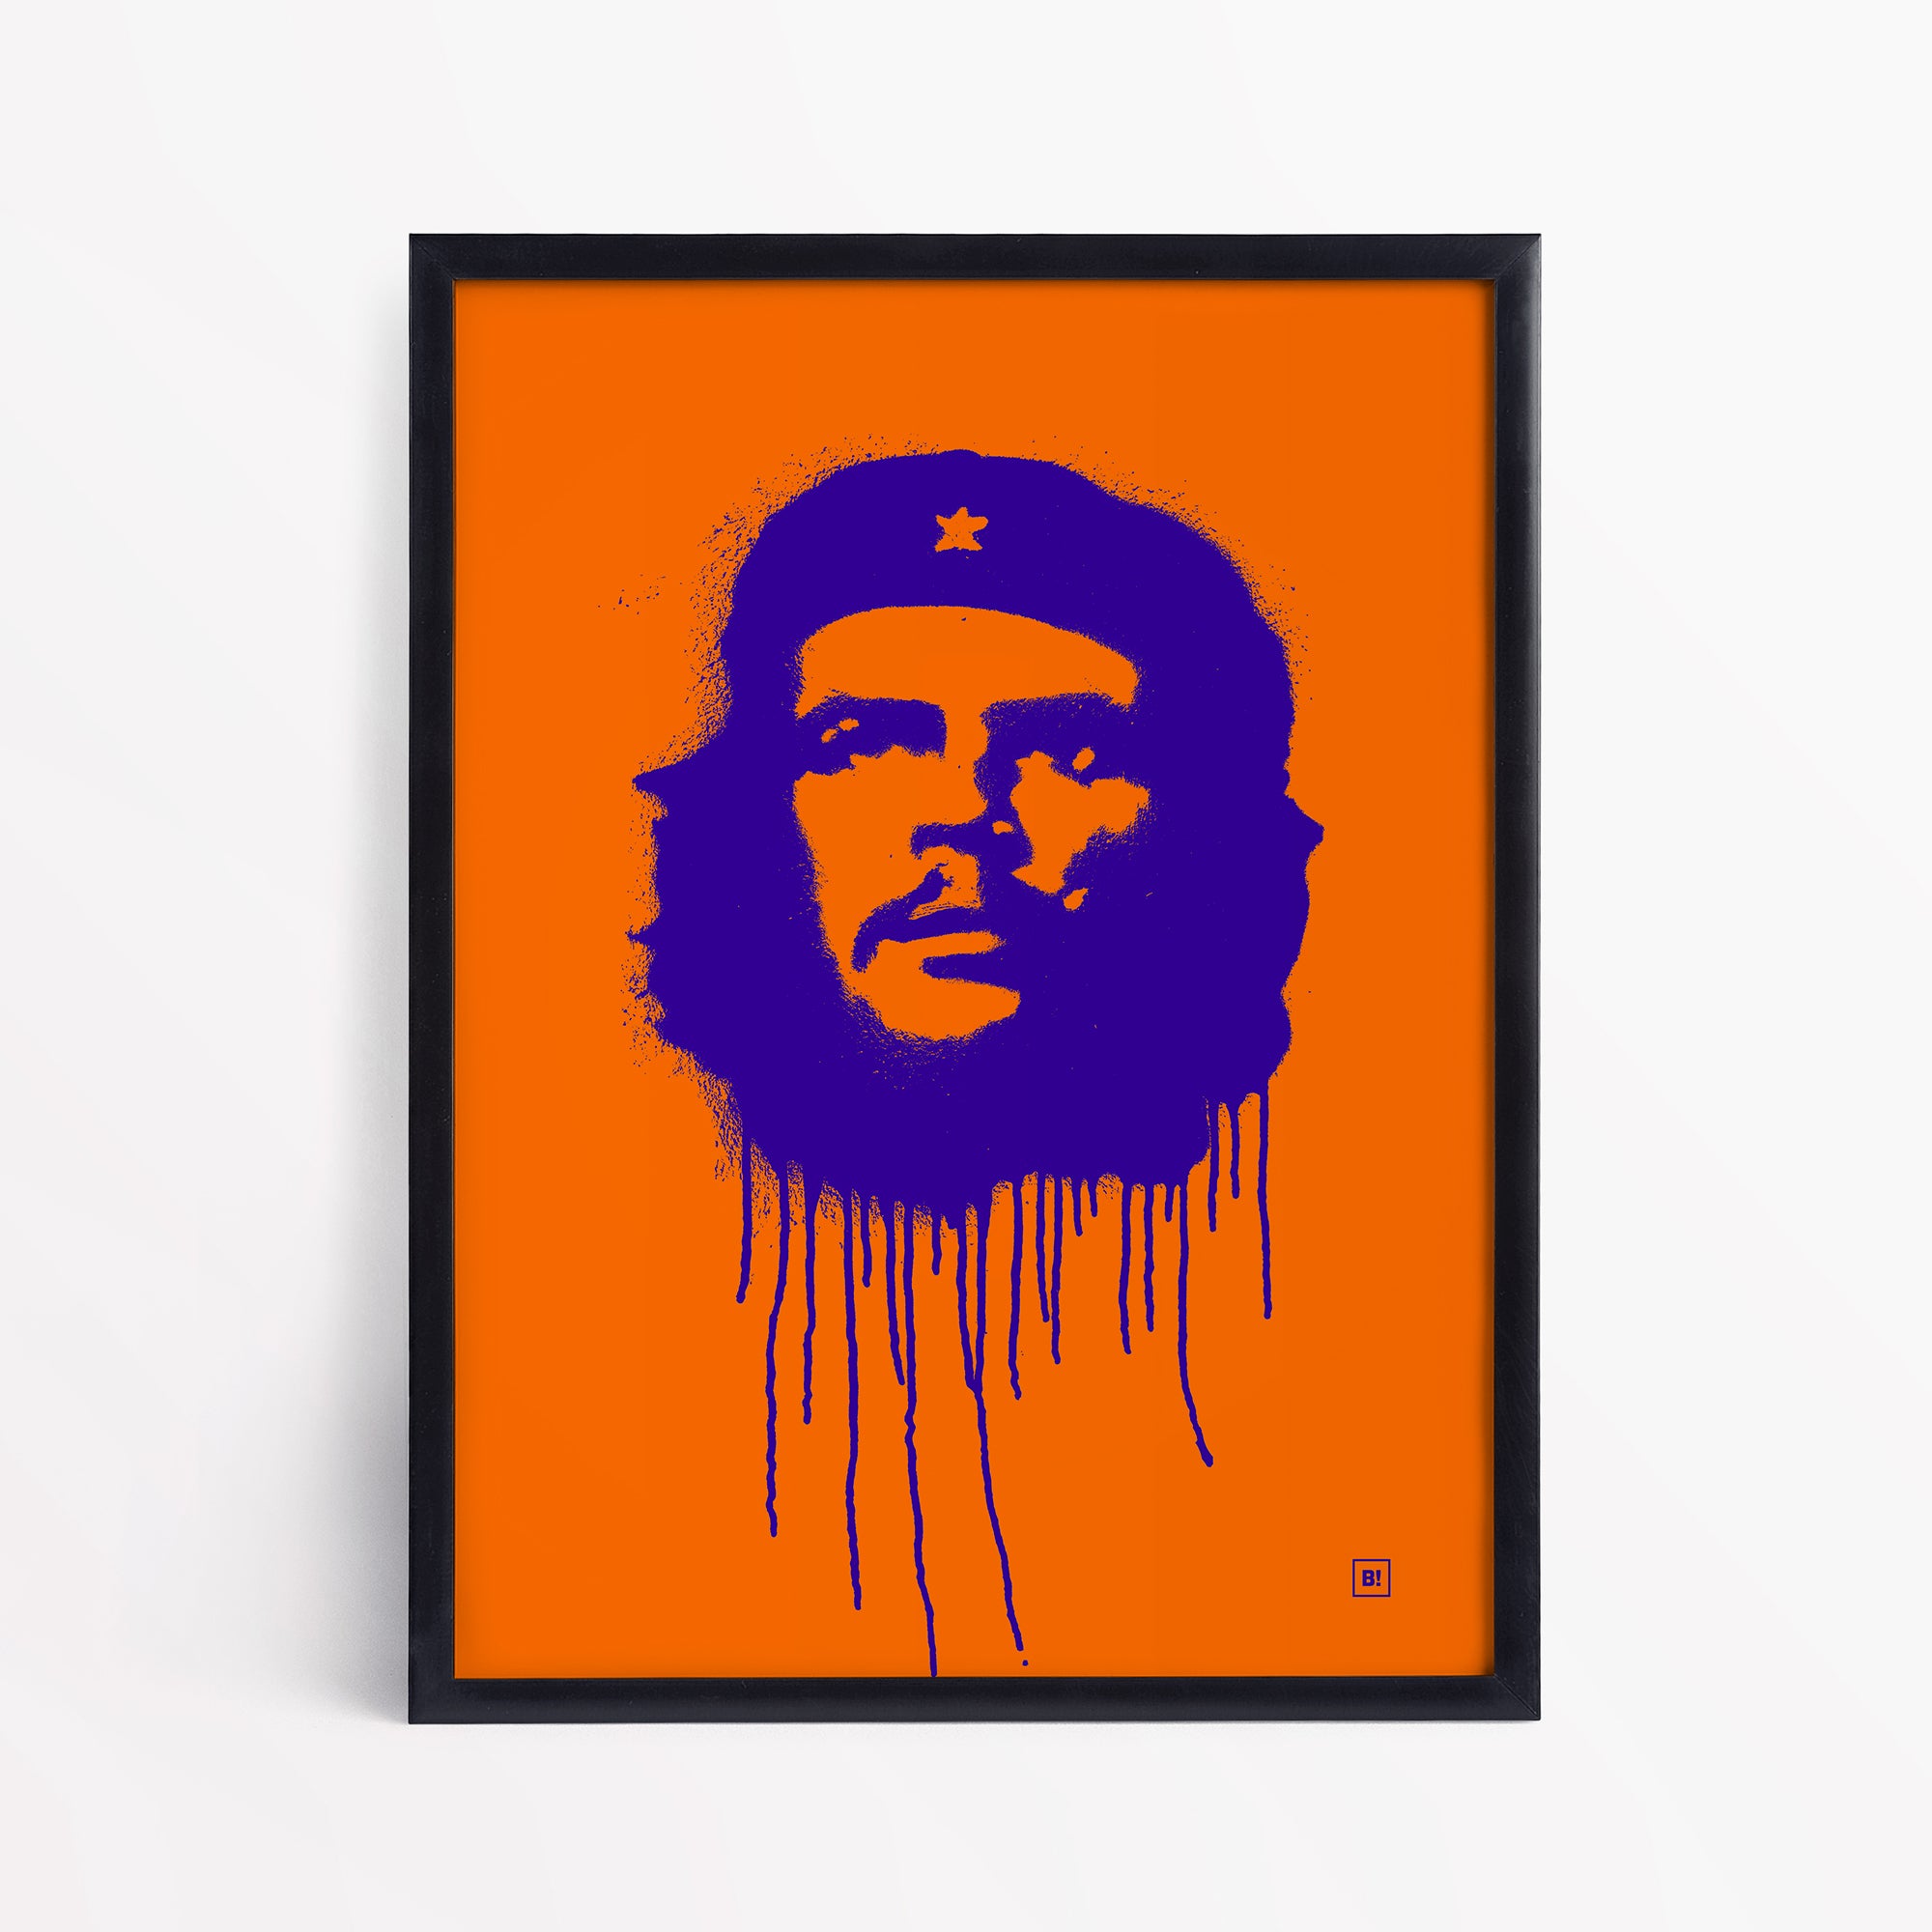 Be inspired by our pop navy "Ernesto Che Guevara" art print! This artwork has been printed using the giclée process on archival acid-free paper and is presented in a sleek black frame, showcasing its timeless beauty in every detail.